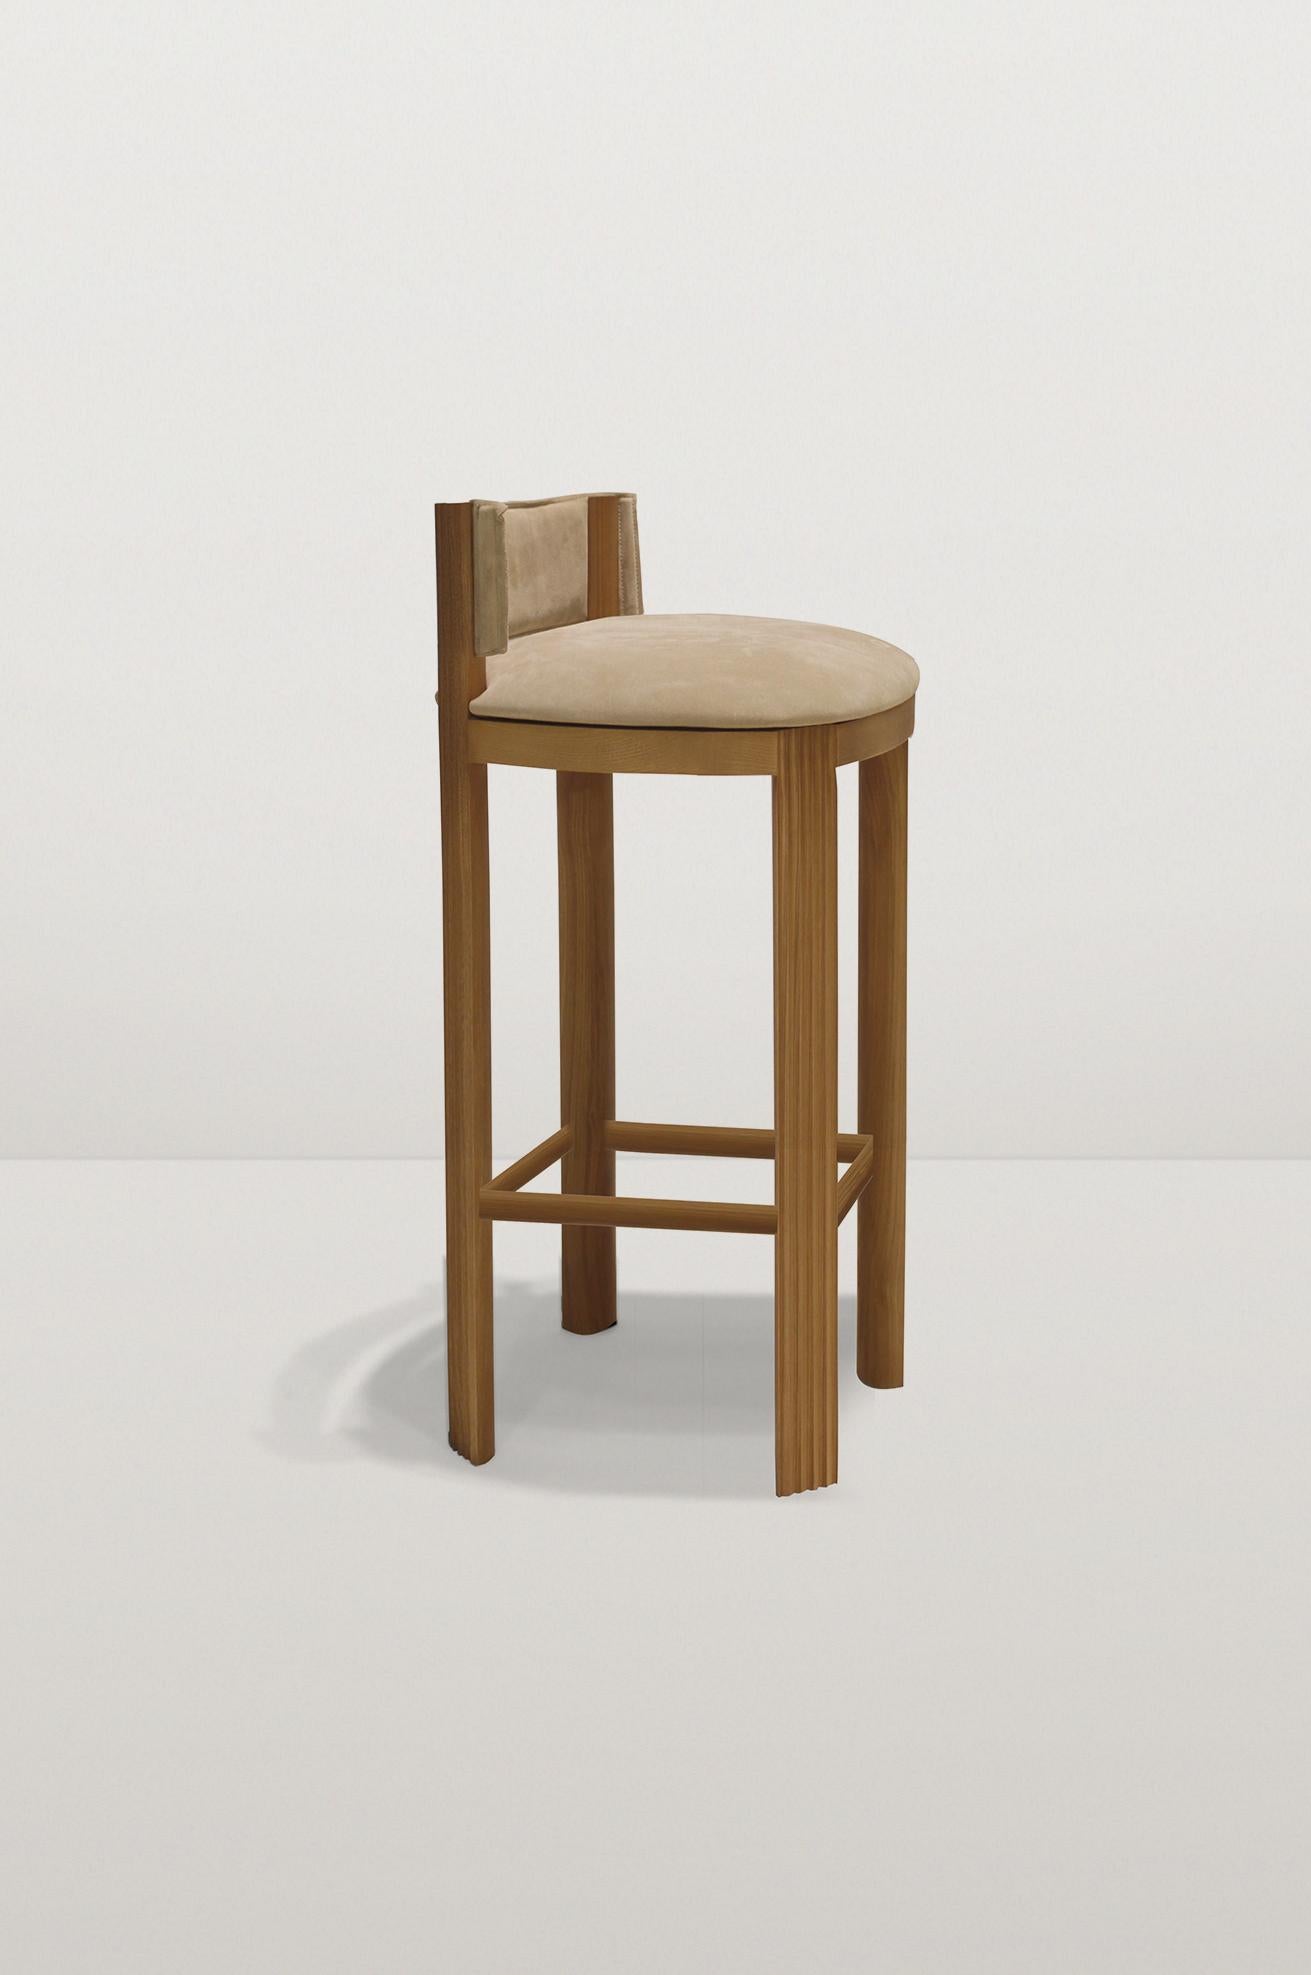 Unique oak bar chair by Collector
Dimensions: W 45 x D 52 x H 102 cm
Materials: Linea 646 Leather covering, Oak Wood.
Other materials available. Depending on the material the price may vary.

The Collector brand aims to be part of the daily life by